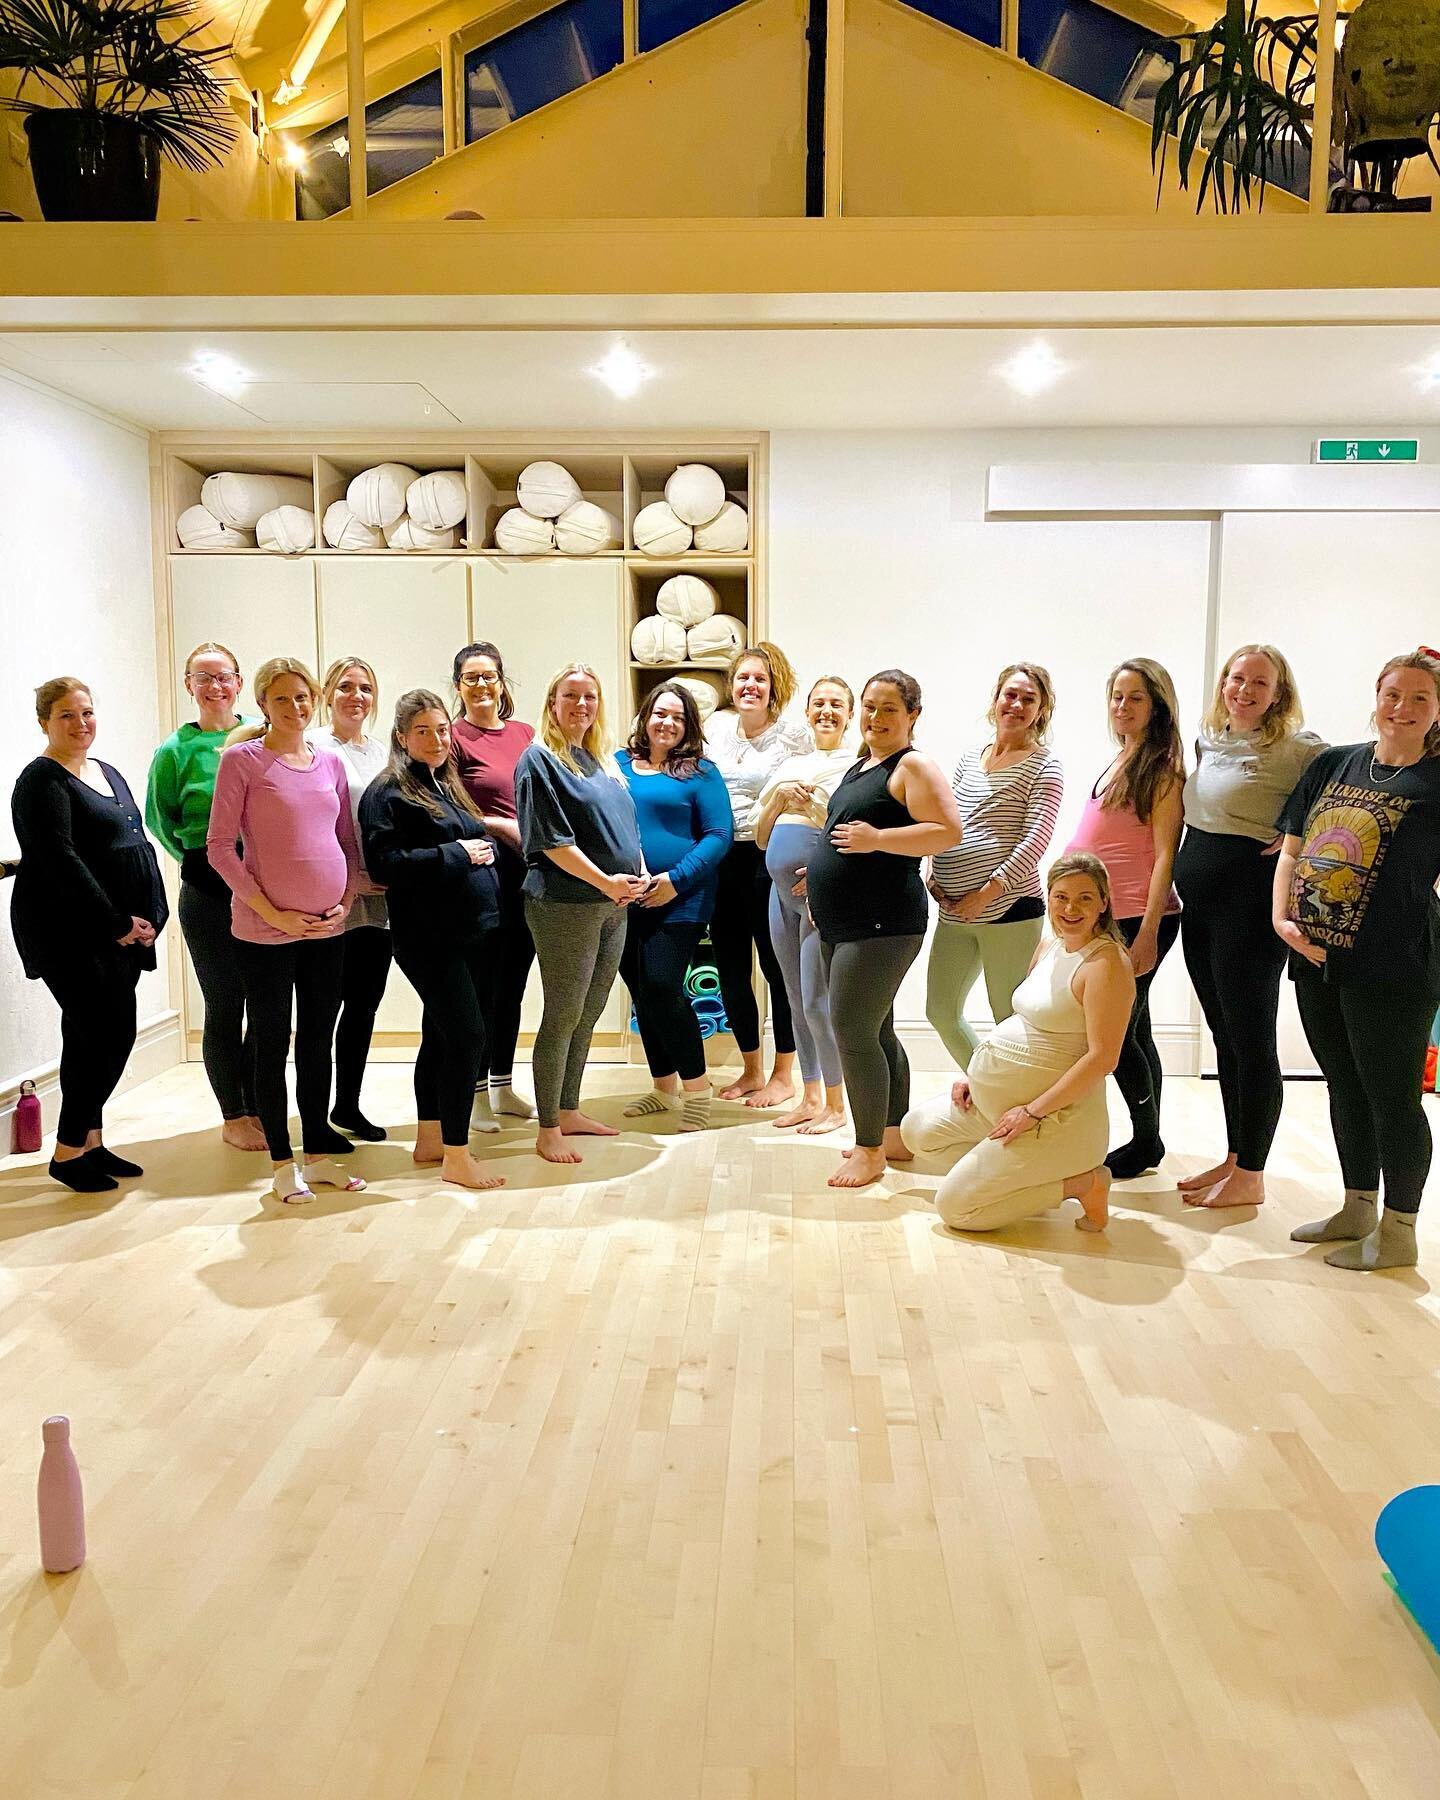 COMMUNITY IN PREGNANCY 🤰🏻..
Is one of my favourite things to create. I love gathering pregnant women in circle. It is a joy to witness how they soften in the presence of each other. Honest, raw reflection and sharing how they are. 
💕
I am a Birth 